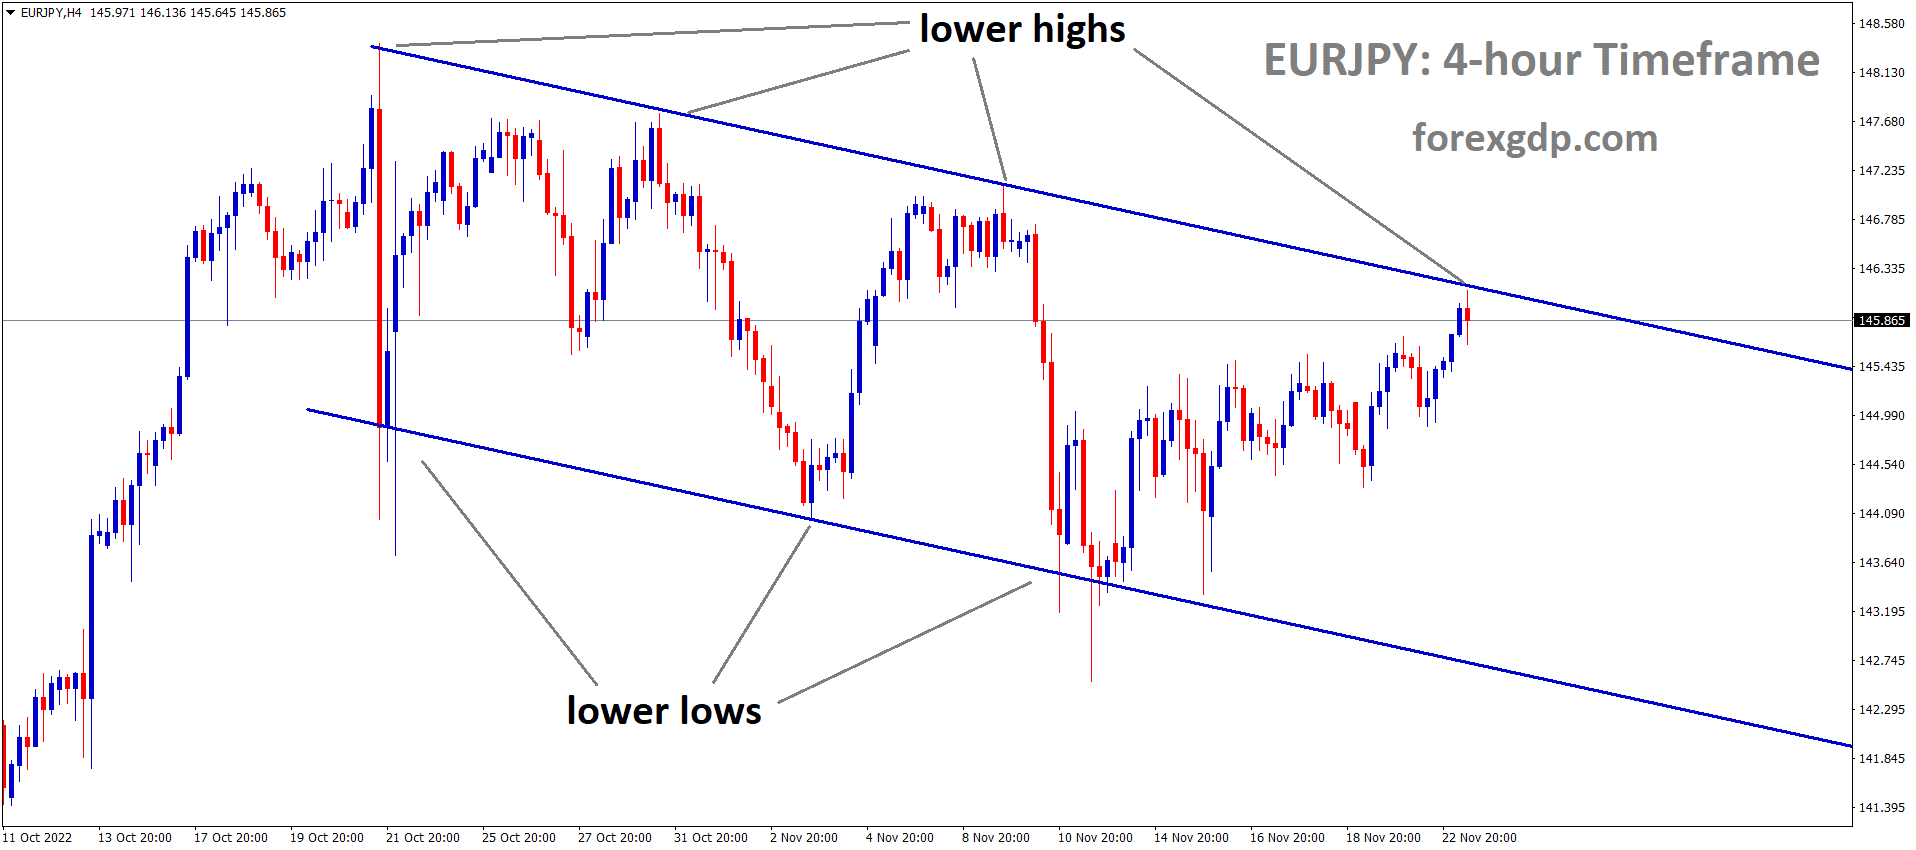 EURJPY is moving in the Descending channel and the market has reached the lower high area of the channel